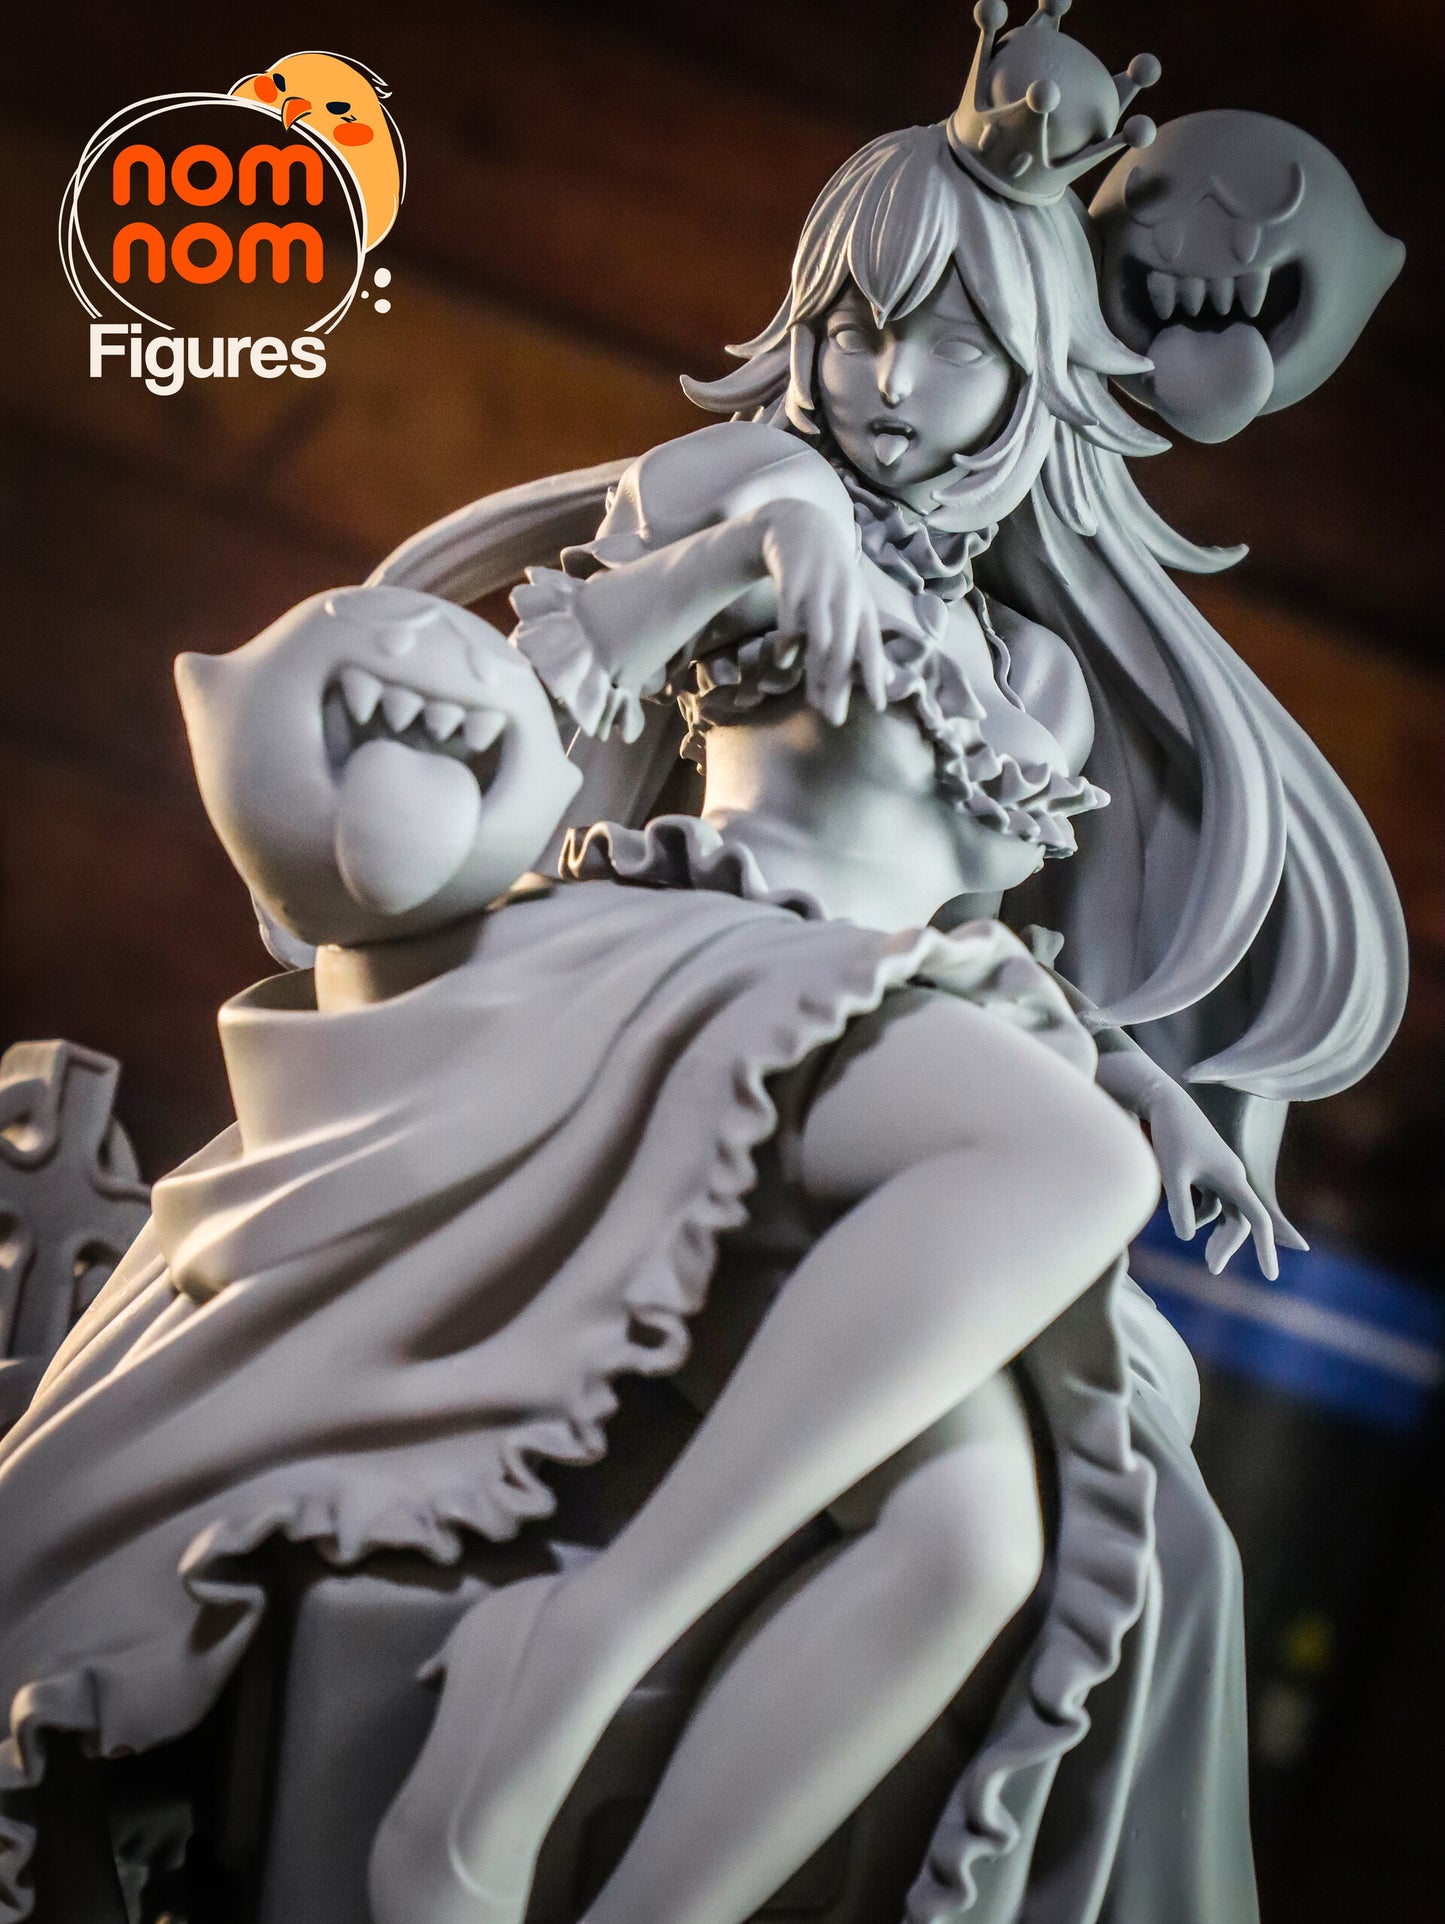 Booette - Super Mario 3D Printed Fanmade Model by Nomnom Figures